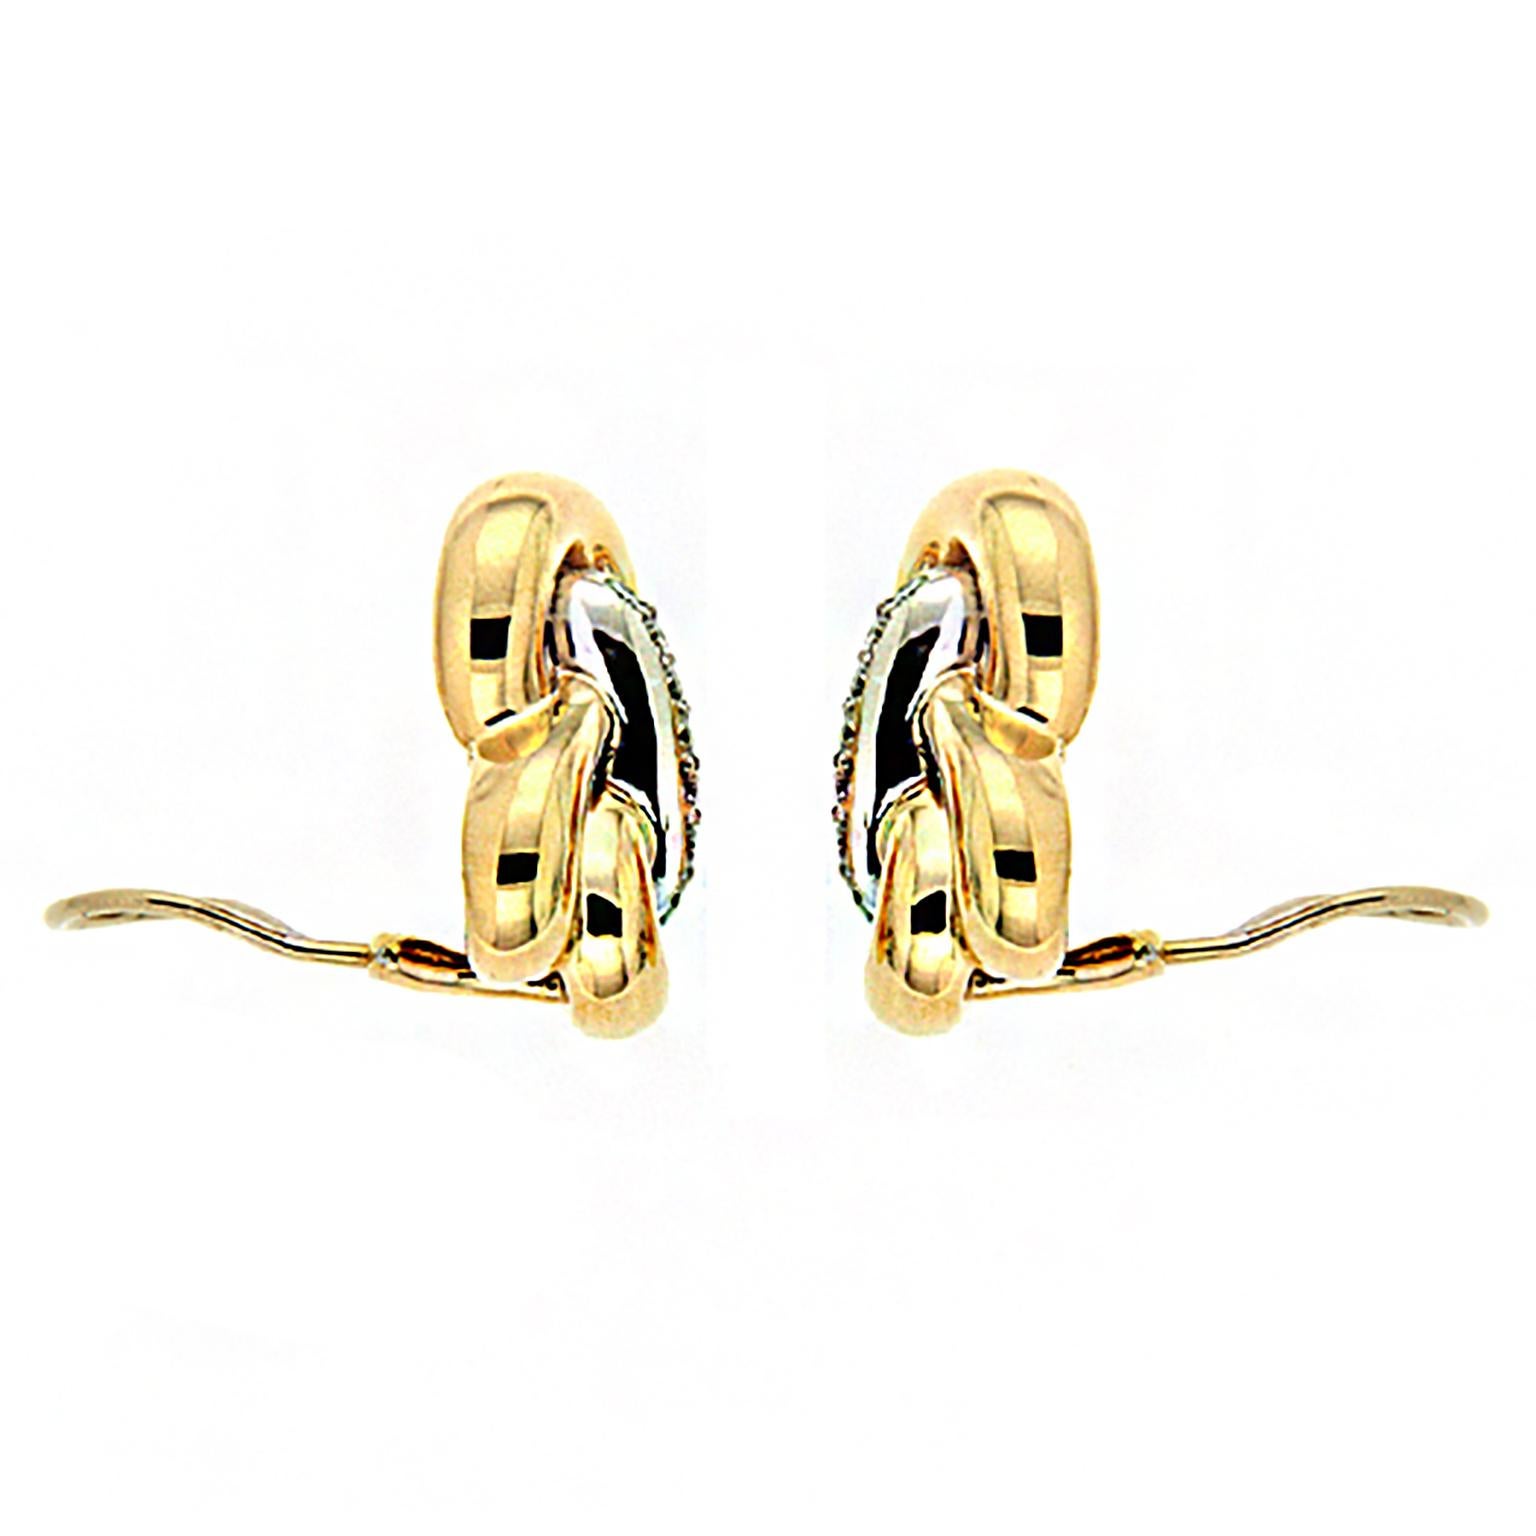 At Valentin Magro, inspiration often begins with the attention to details and lifestyles. The Hercules knot is a classic jewelry motif. Here, it forms earrings of 18k yellow gold and embellished with strips of platinum. Each piece is a mirror of the